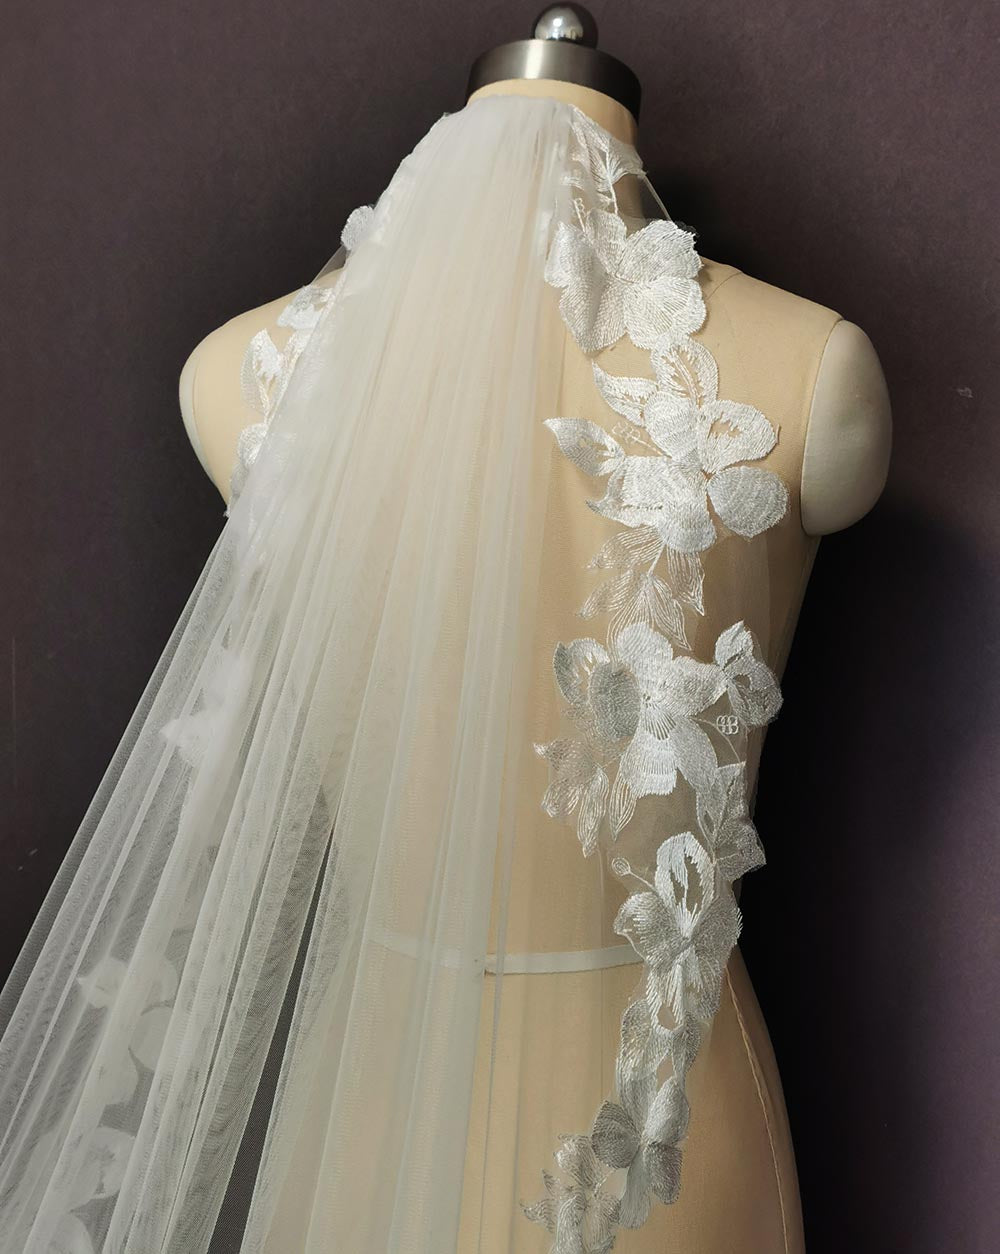 Tulle Flower Lace Cathedral Wedding Veil 3 Meters 1 Layer Bridal Veil